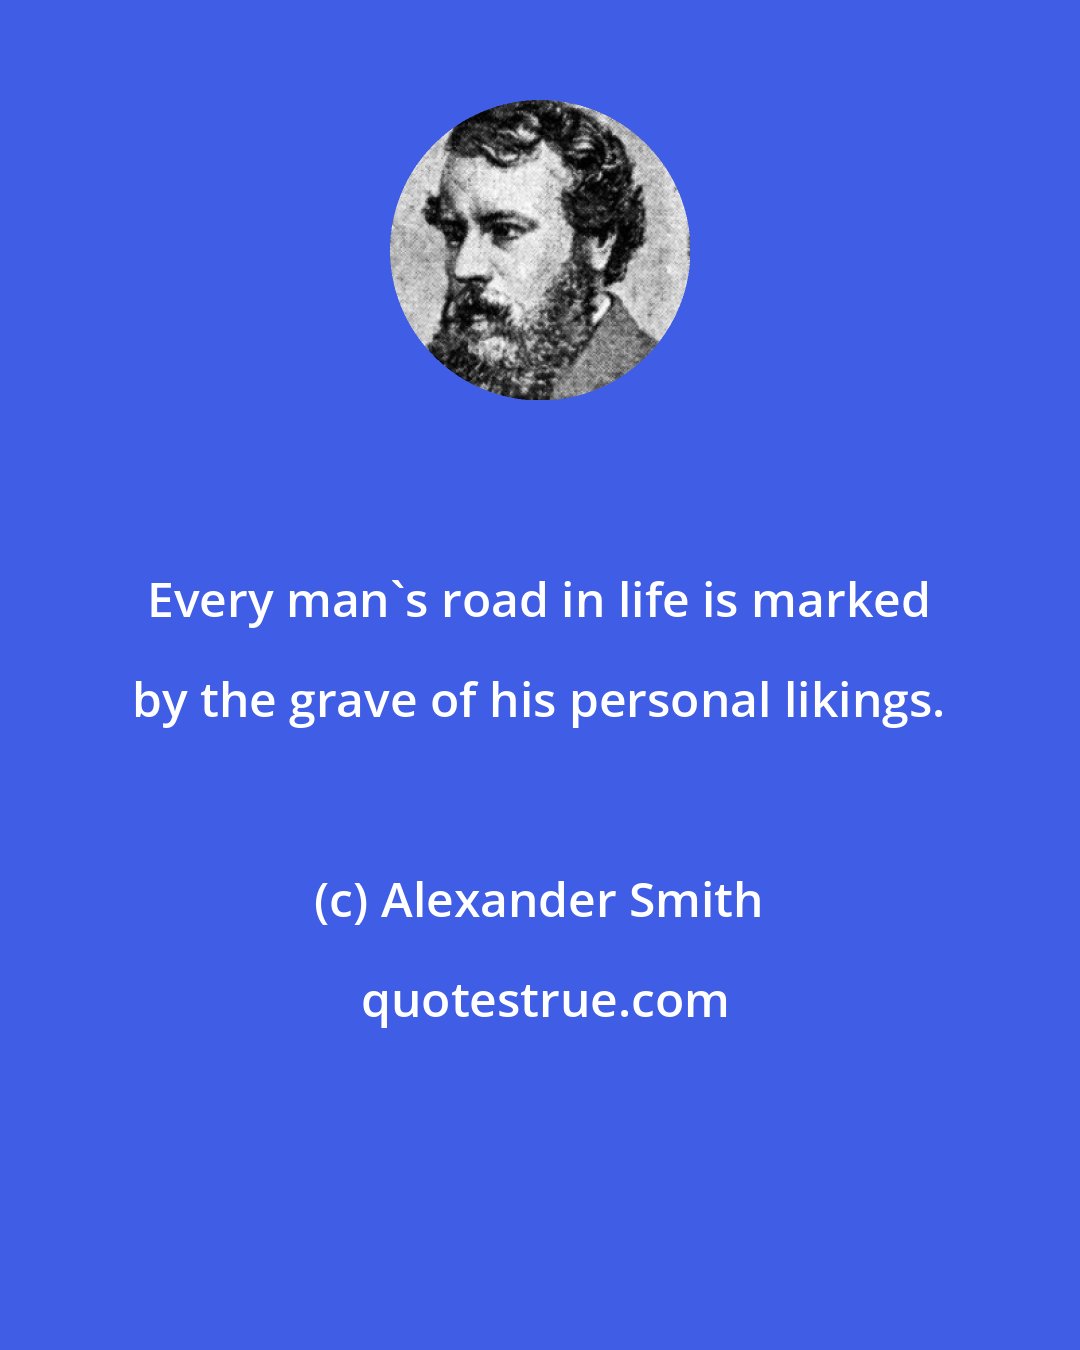 Alexander Smith: Every man's road in life is marked by the grave of his personal likings.